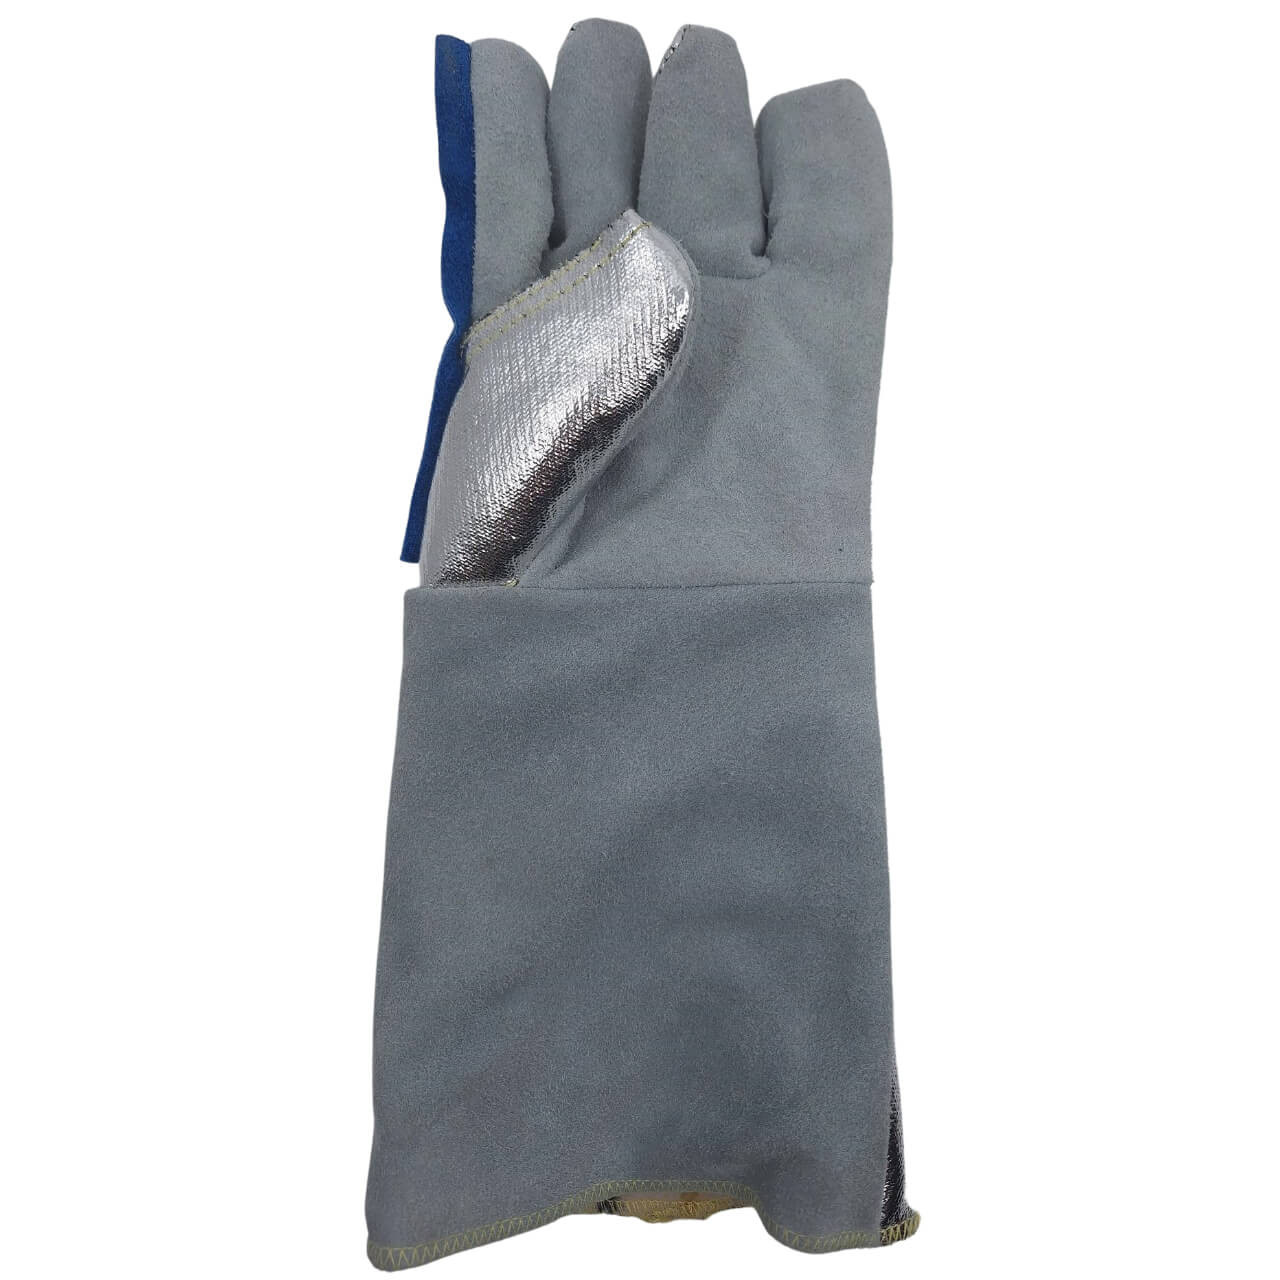 Aluminised Chrome Leather Glove - 1x LH Only